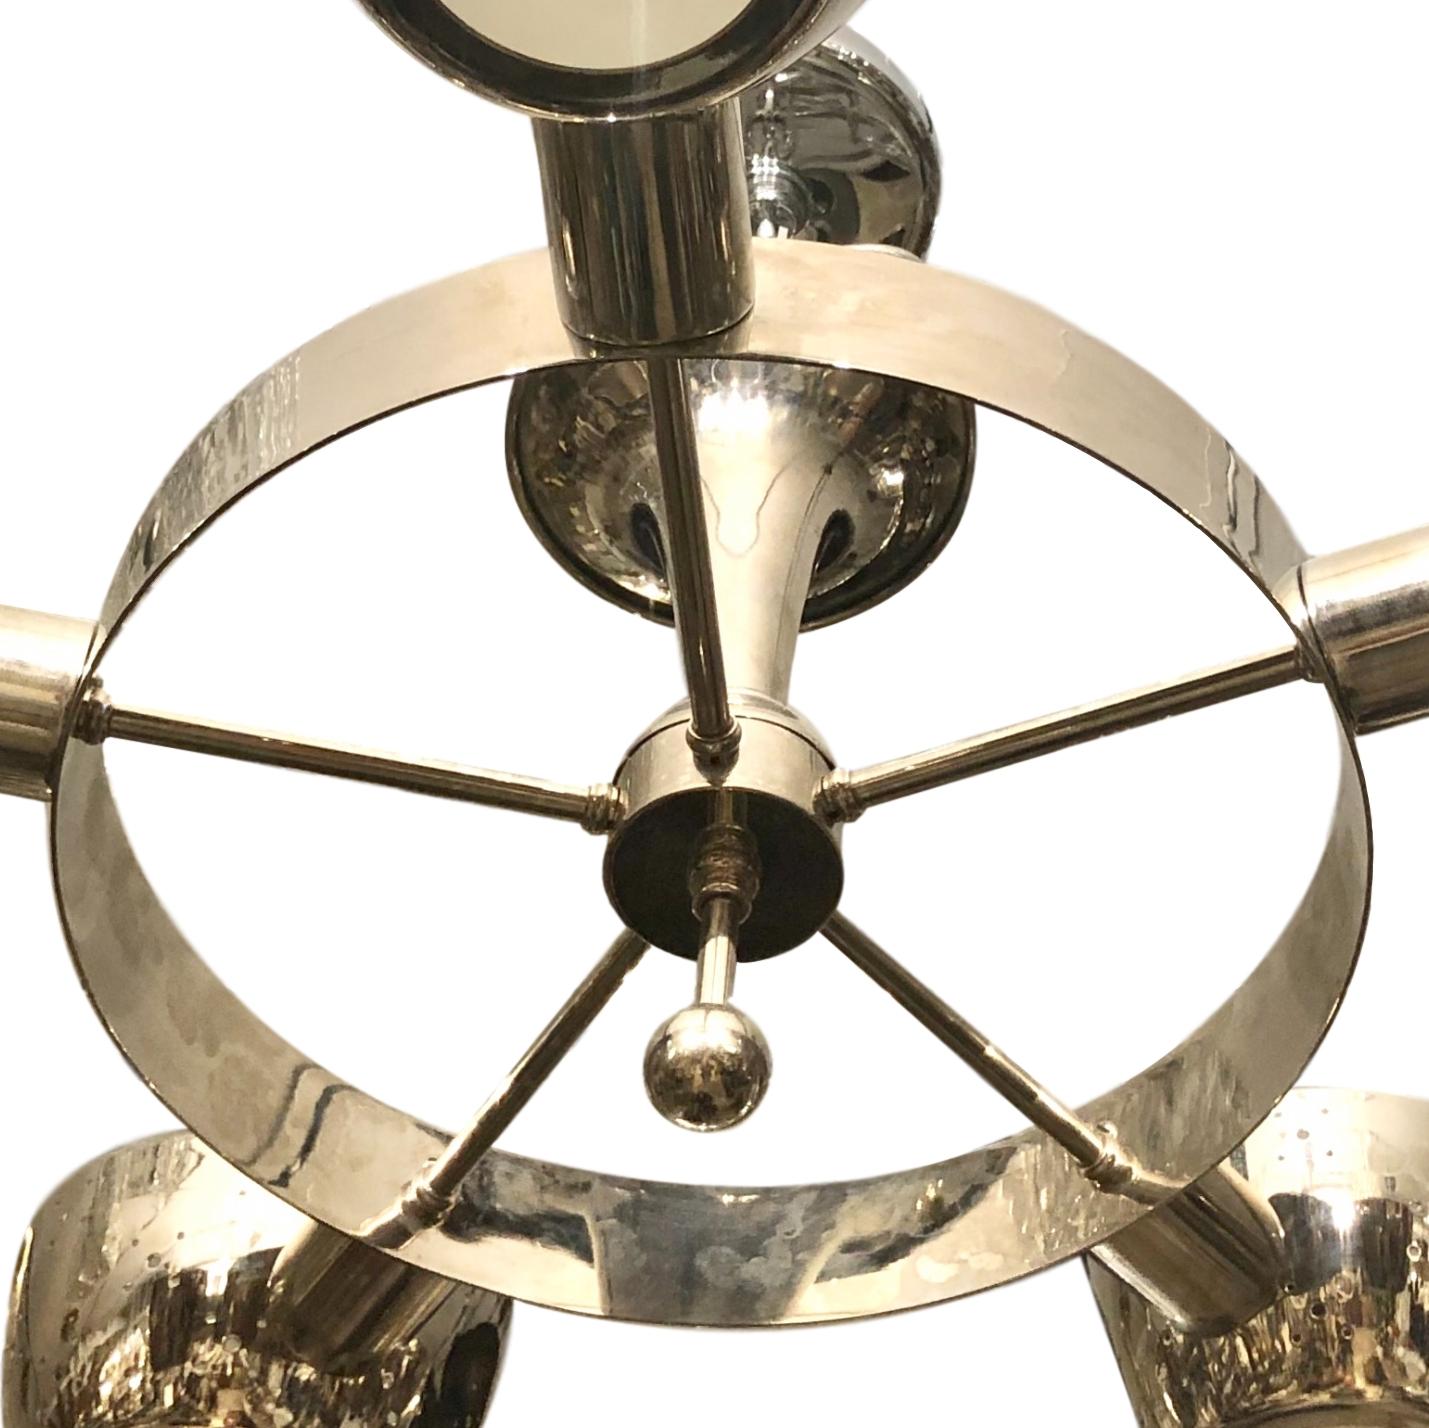 A set of four circa 1960's Italian nickel-plated five-arm light fixture with frosted glass insets. Sold individually.

Measurements:
Current drop: 18